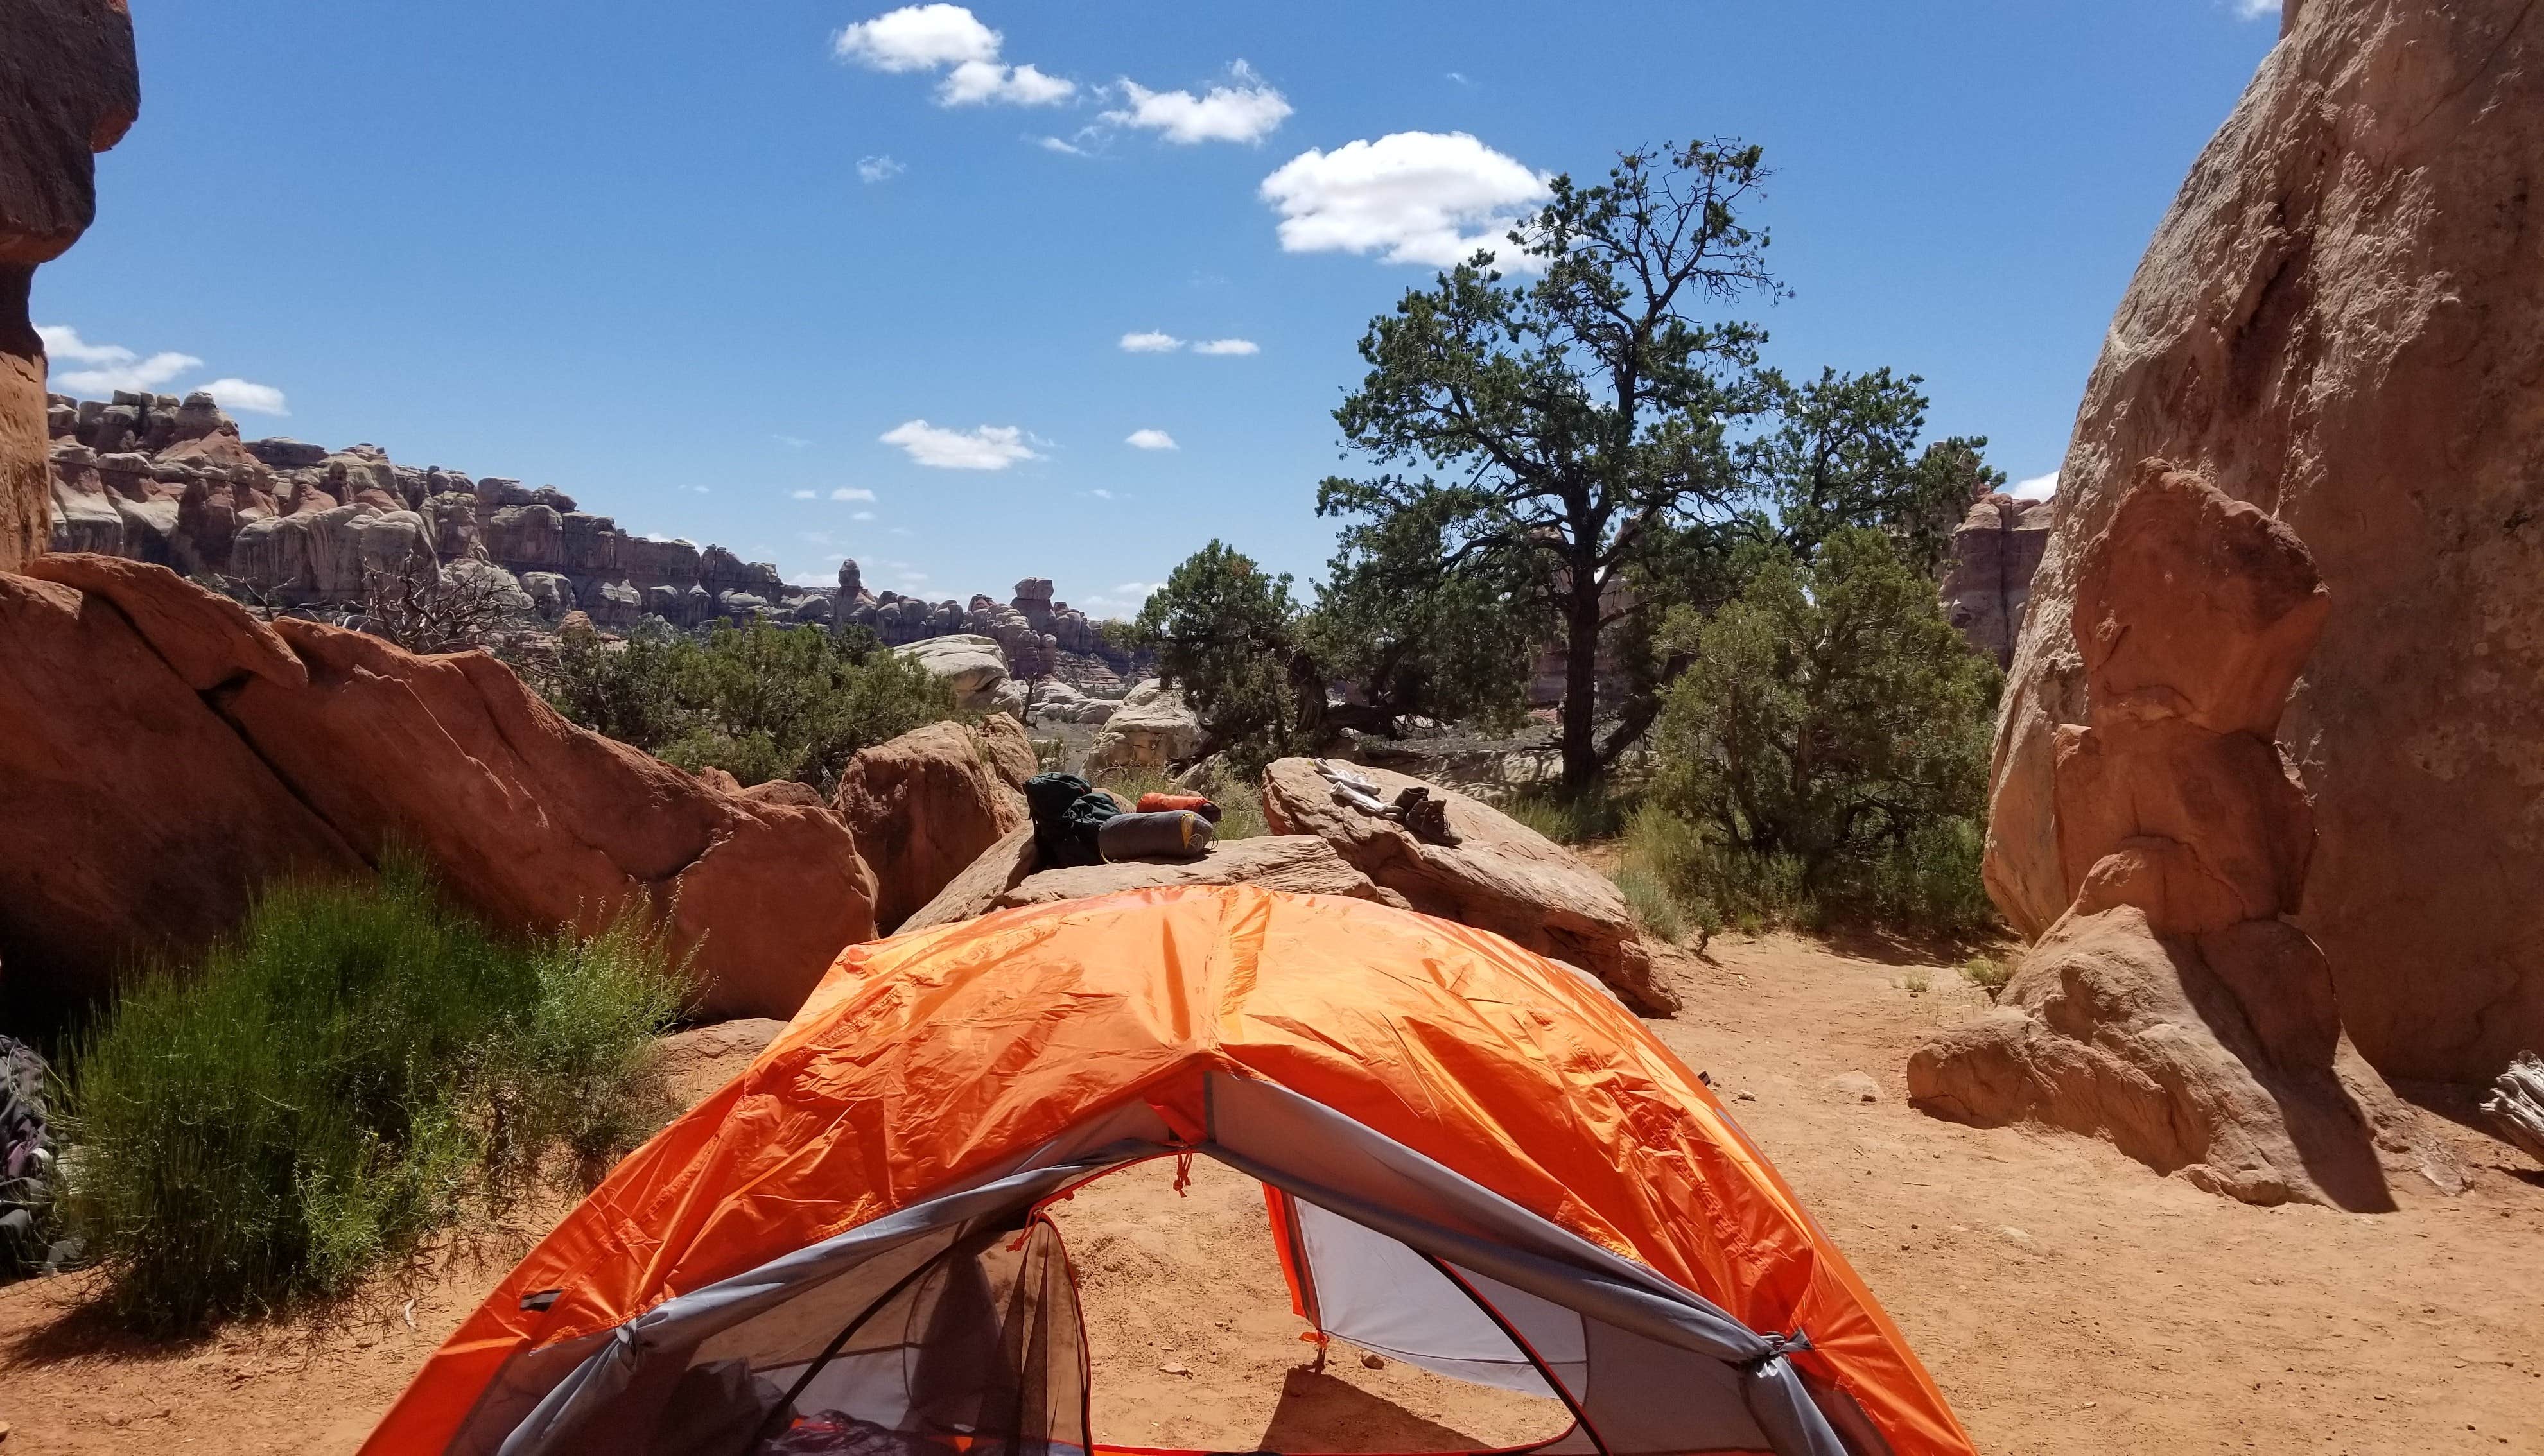 Camper submitted image from Chesler Park 1 (CP1) Backcountry Campsite, Needles District of Canyonlands National Park - 4